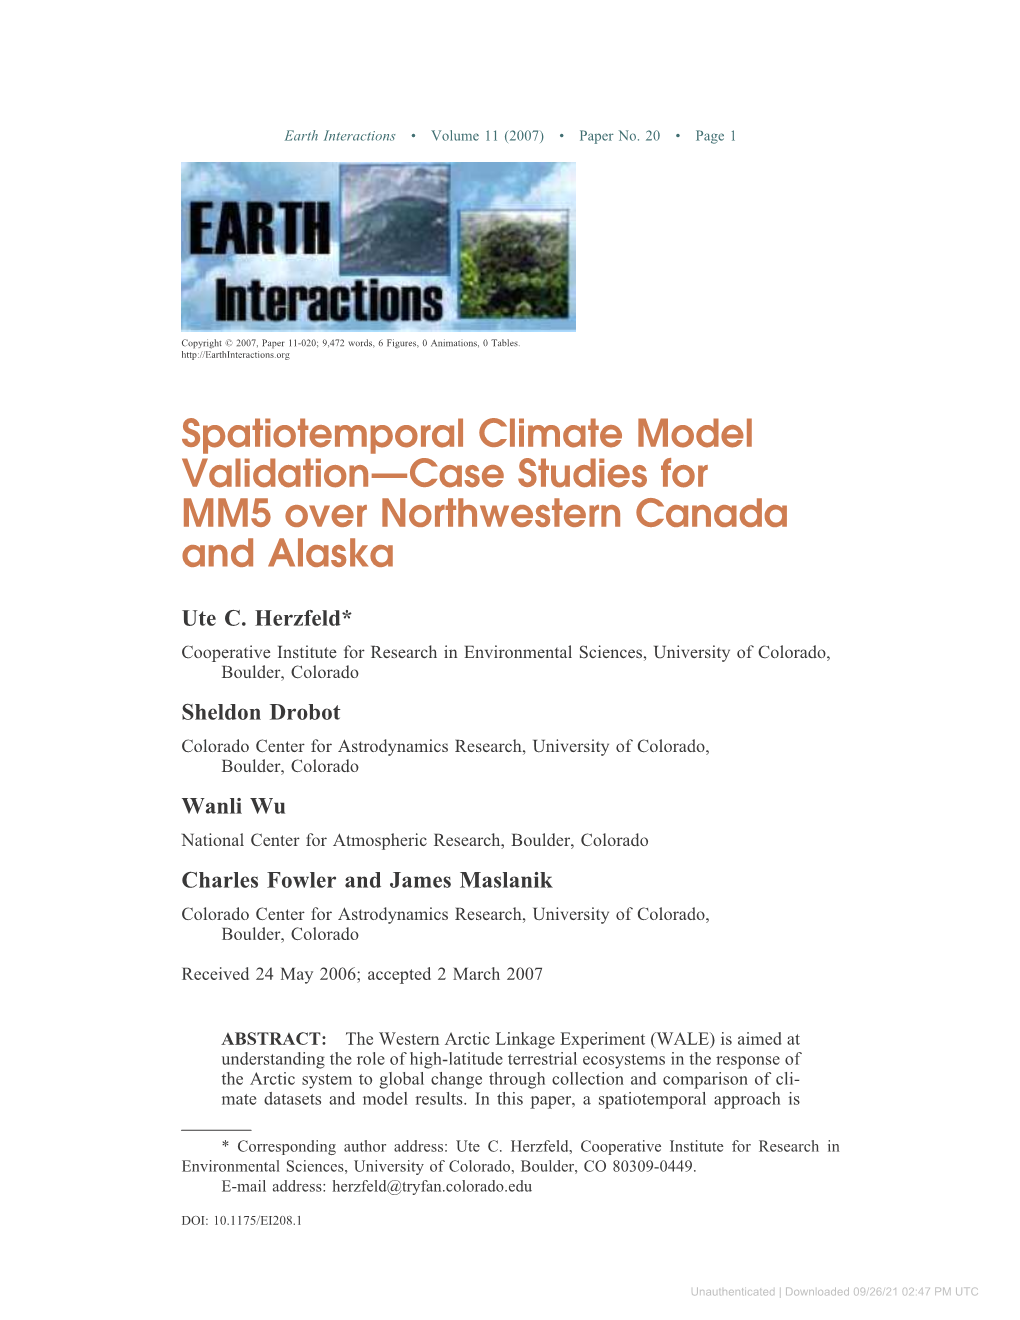 Spatiotemporal Climate Model Validation—Case Studies for MM5 Over Northwestern Canada and Alaska